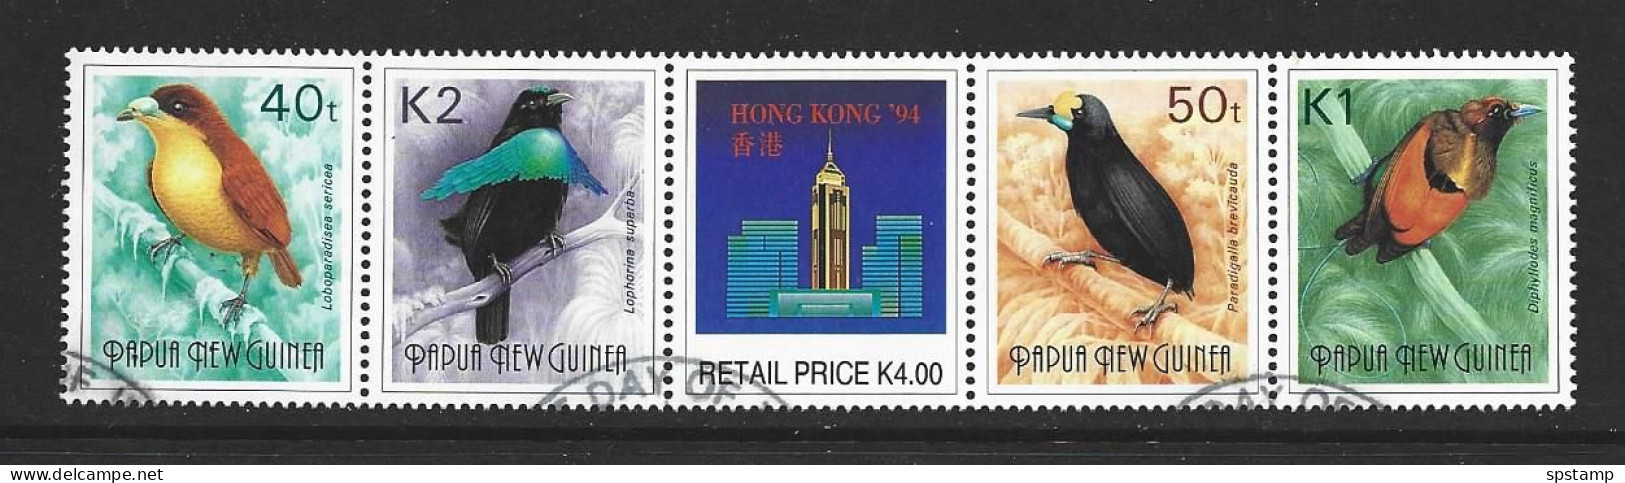 Papua New Guinea 1994 Birds / Hong Kong Exhibition Strip Of 4 With Central Label FU - Papua New Guinea